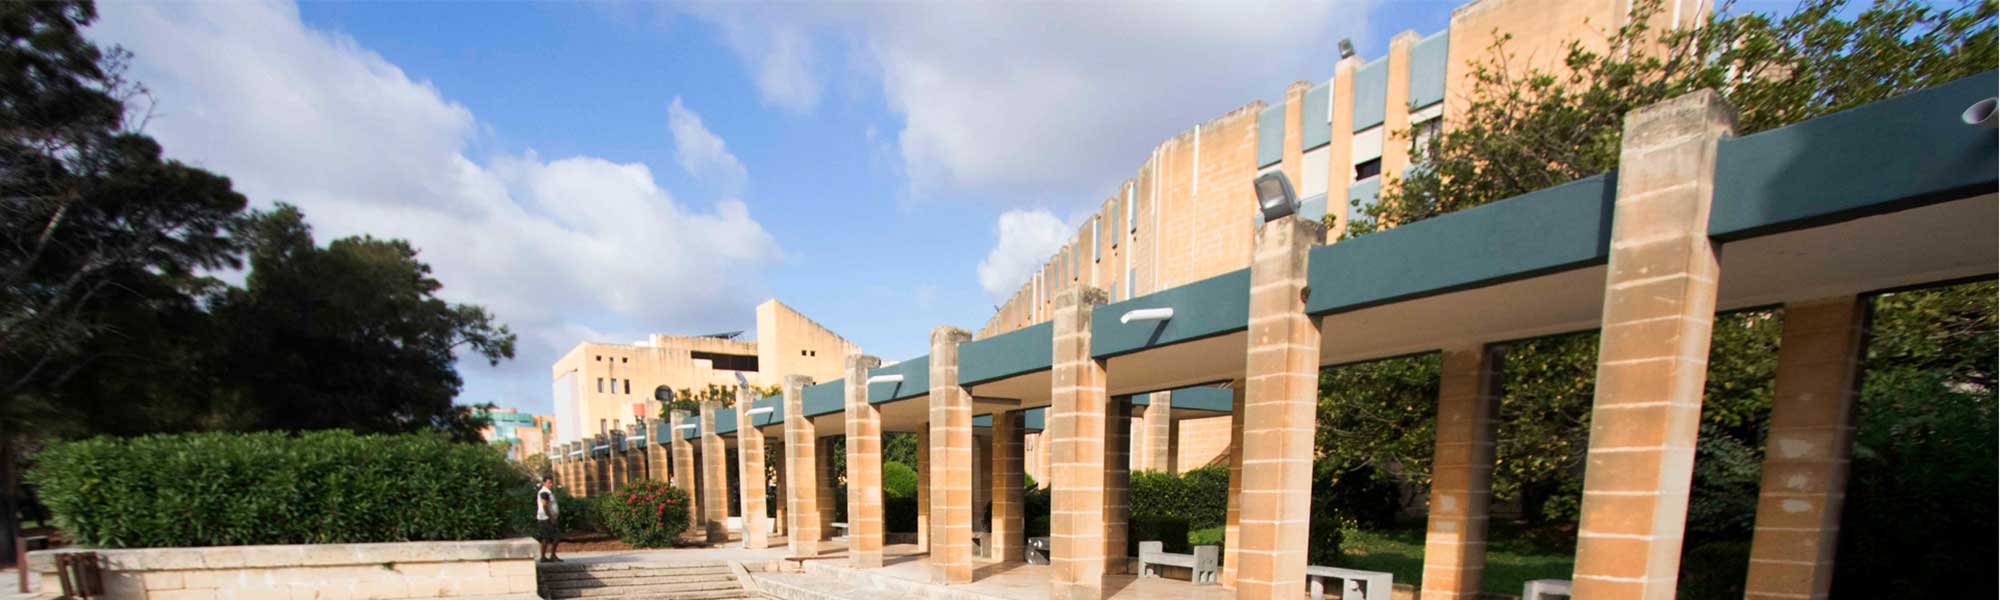 Administration building at the Msida Campus